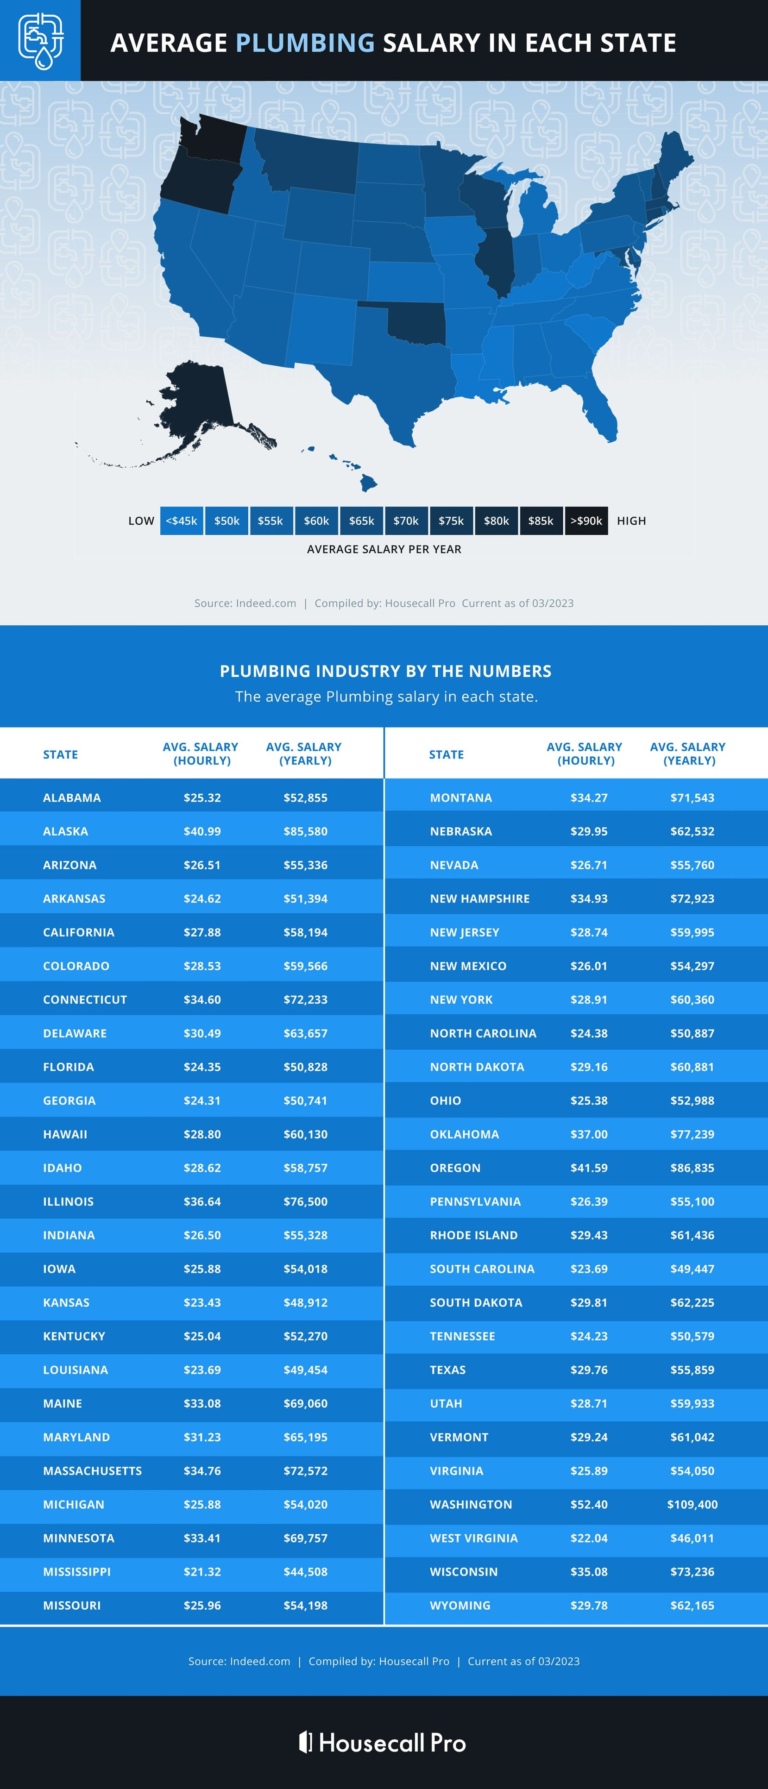 Where Are Plumbers Paid The Most?